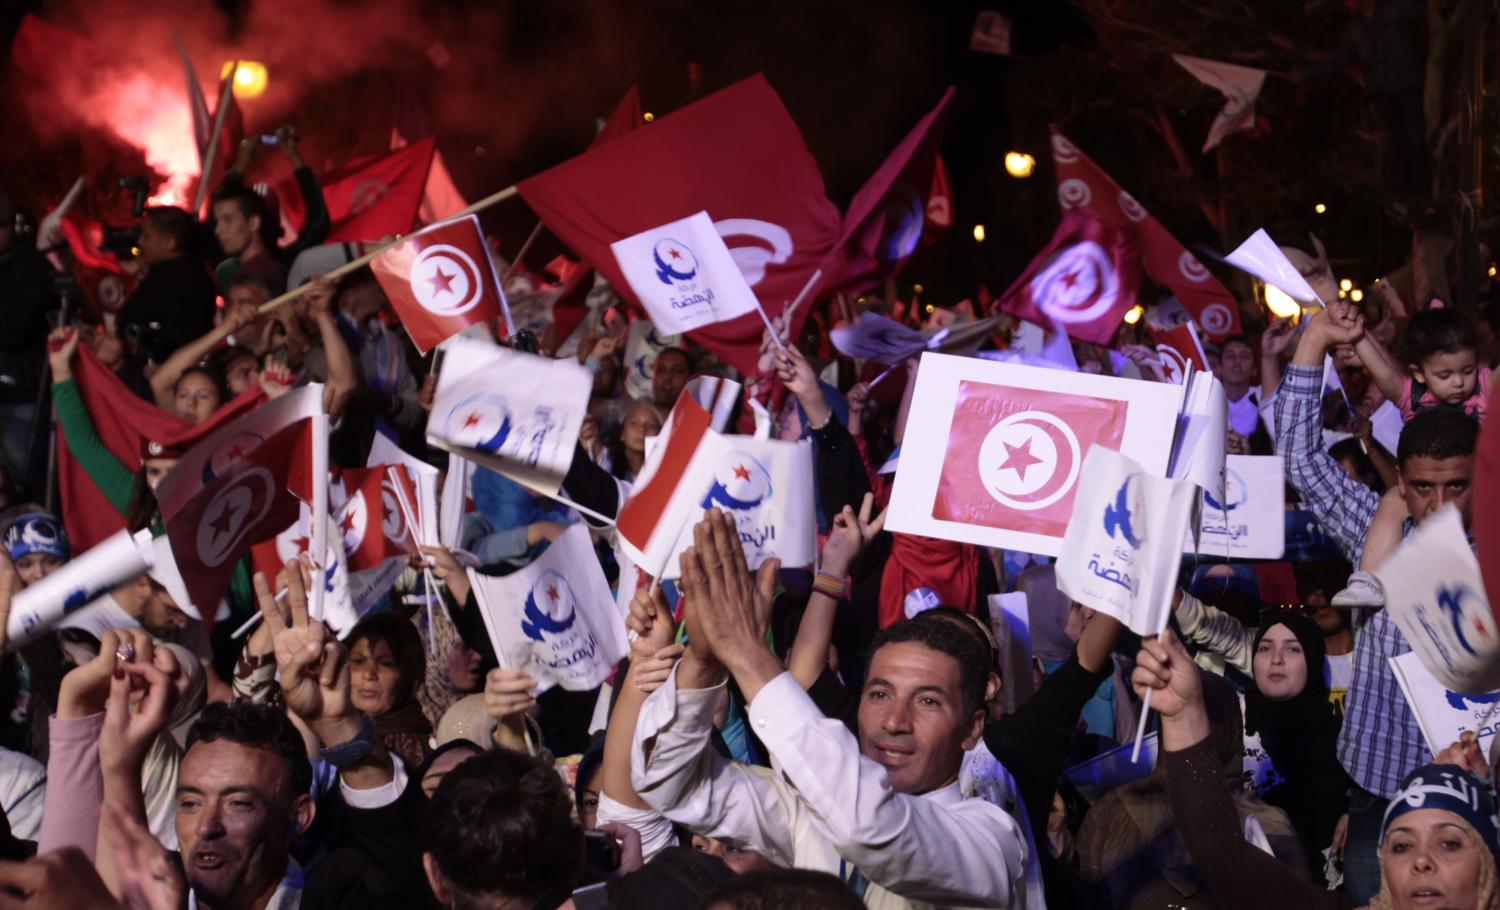 Supporters of the Islamist Ennahda movement wave party flags during a campaign event in Tunis October 24, 2014. Tunisia will hold parliamentary elections on October 26 and a presidential ballot in November. REUTERS/Zoubeir Souissi